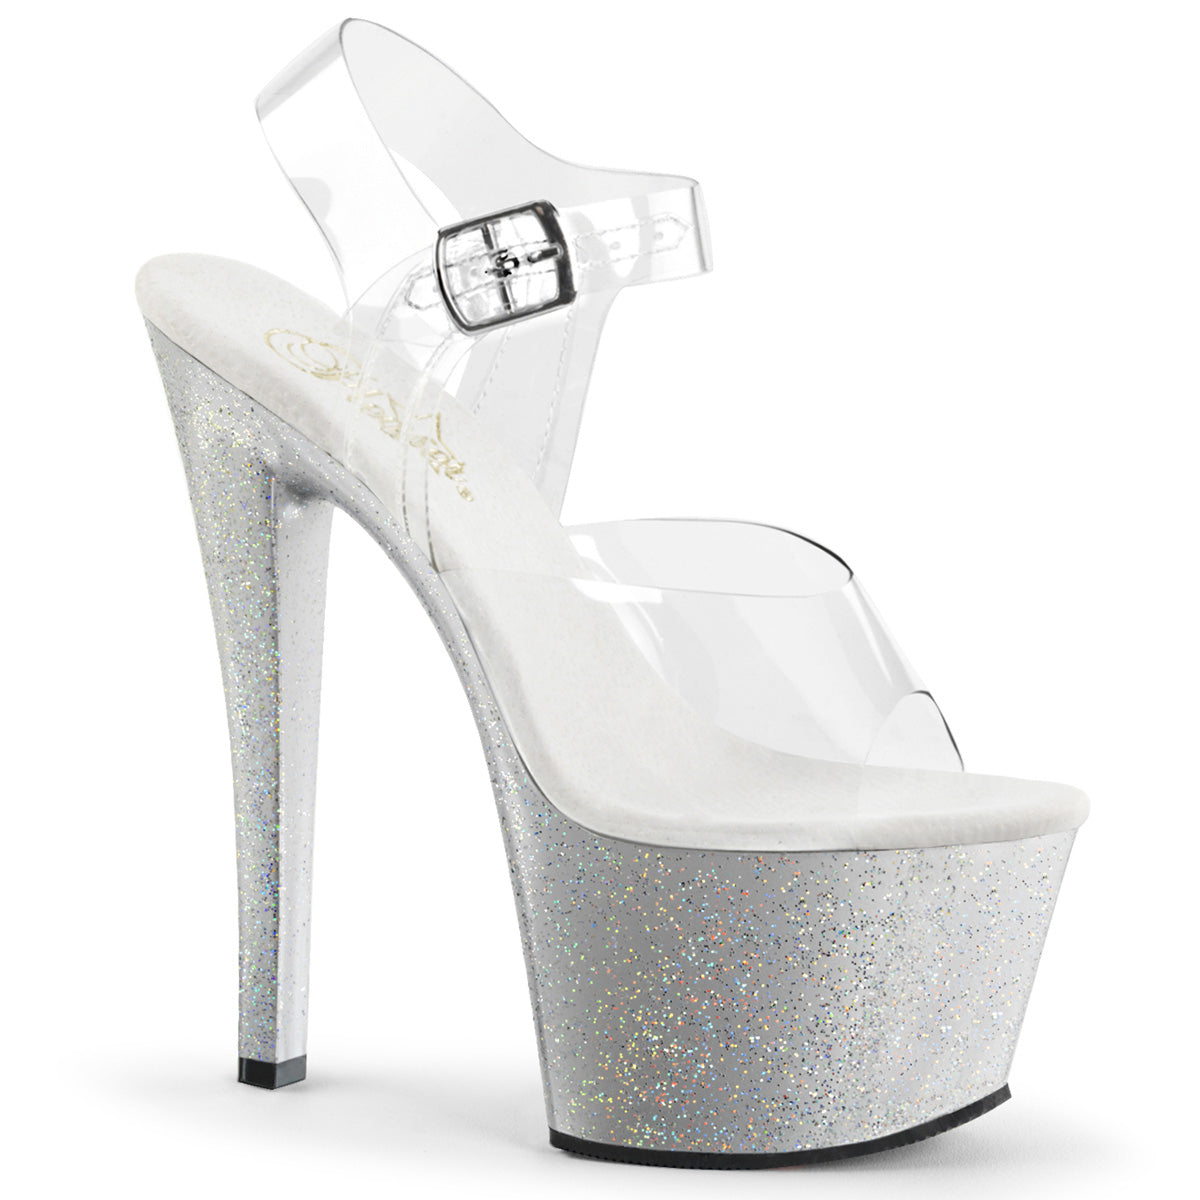 SKY-308MG 7" Heel Clear and Silver Pole Dancing Platforms-Pleaser- Sexy Shoes